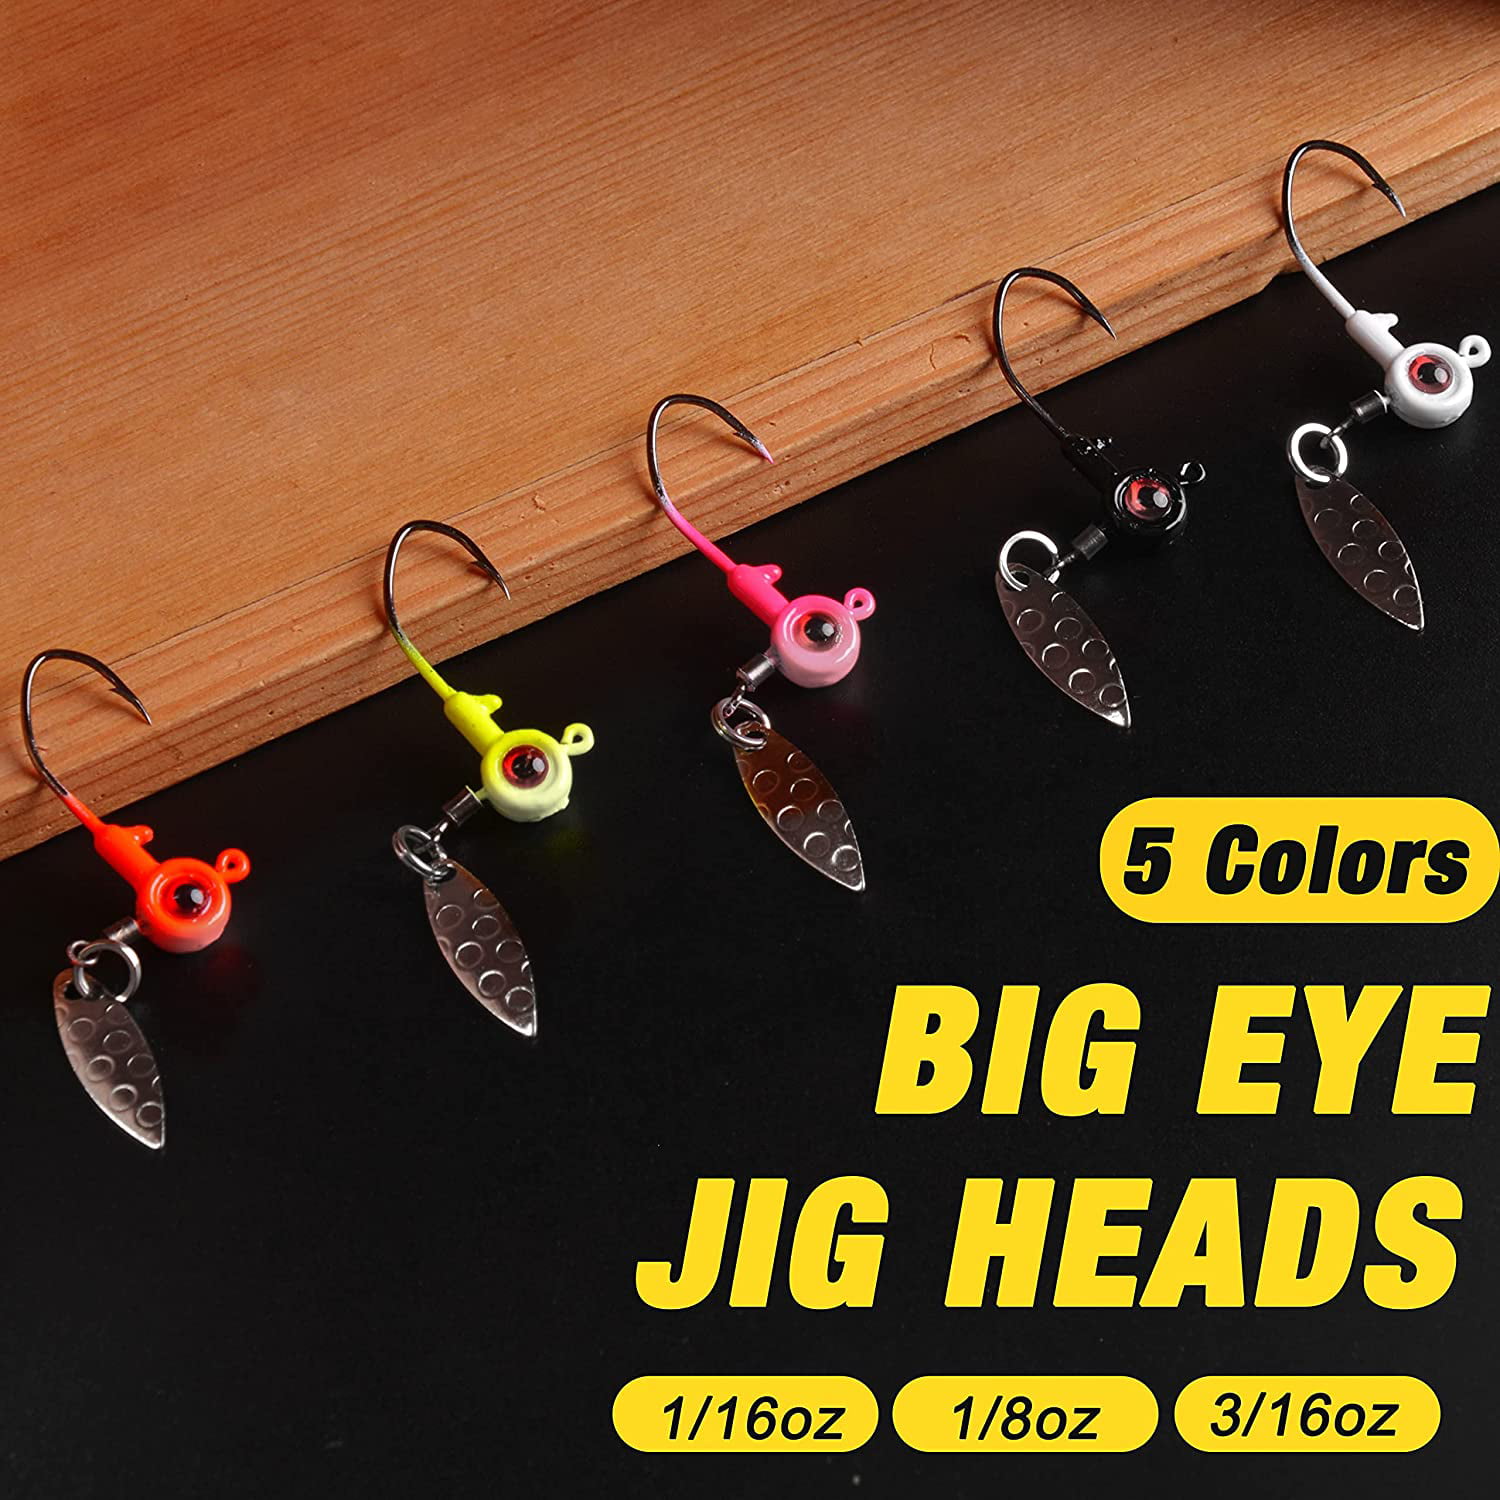 25 Pcs Crappie Jig Heads for Fishing, 3D Eyes Jig with Spinner Blade  Panfish Hook Lure Kit for Freshwater Saltwater, 1/8 oz 1/16 oz 1/5 oz 1/4  oz 3/8